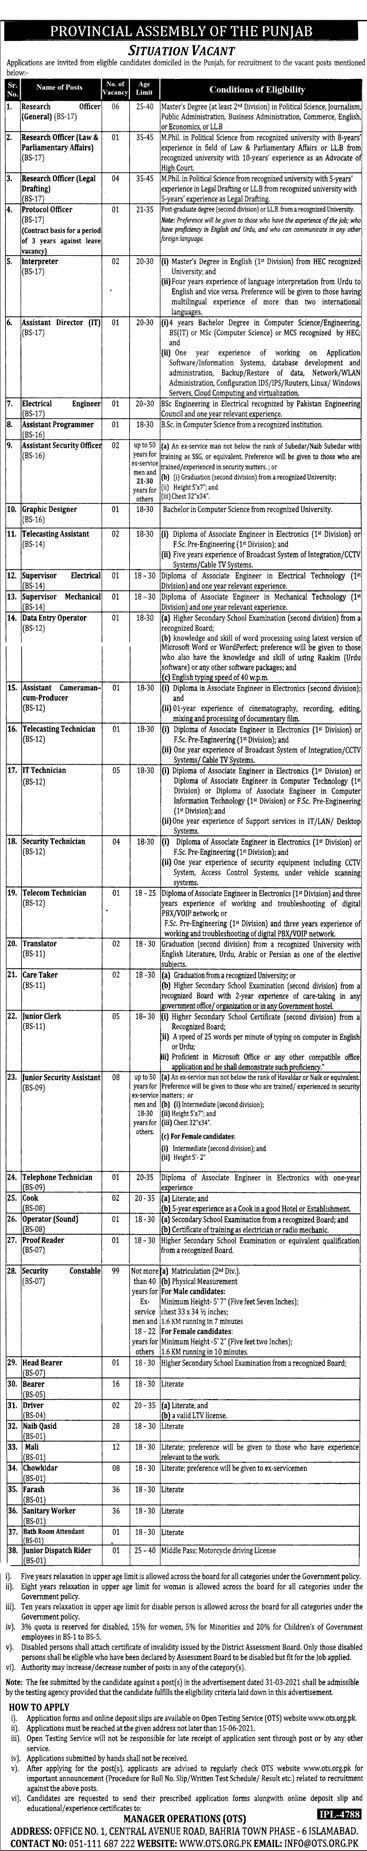 New Jobs in Provincial Assembly of Punjab OTS Jobs 2021 Age (18-50)  OTS Jobs in Punjab Assembly Pakistan - Apply online by www.newjobs.pk